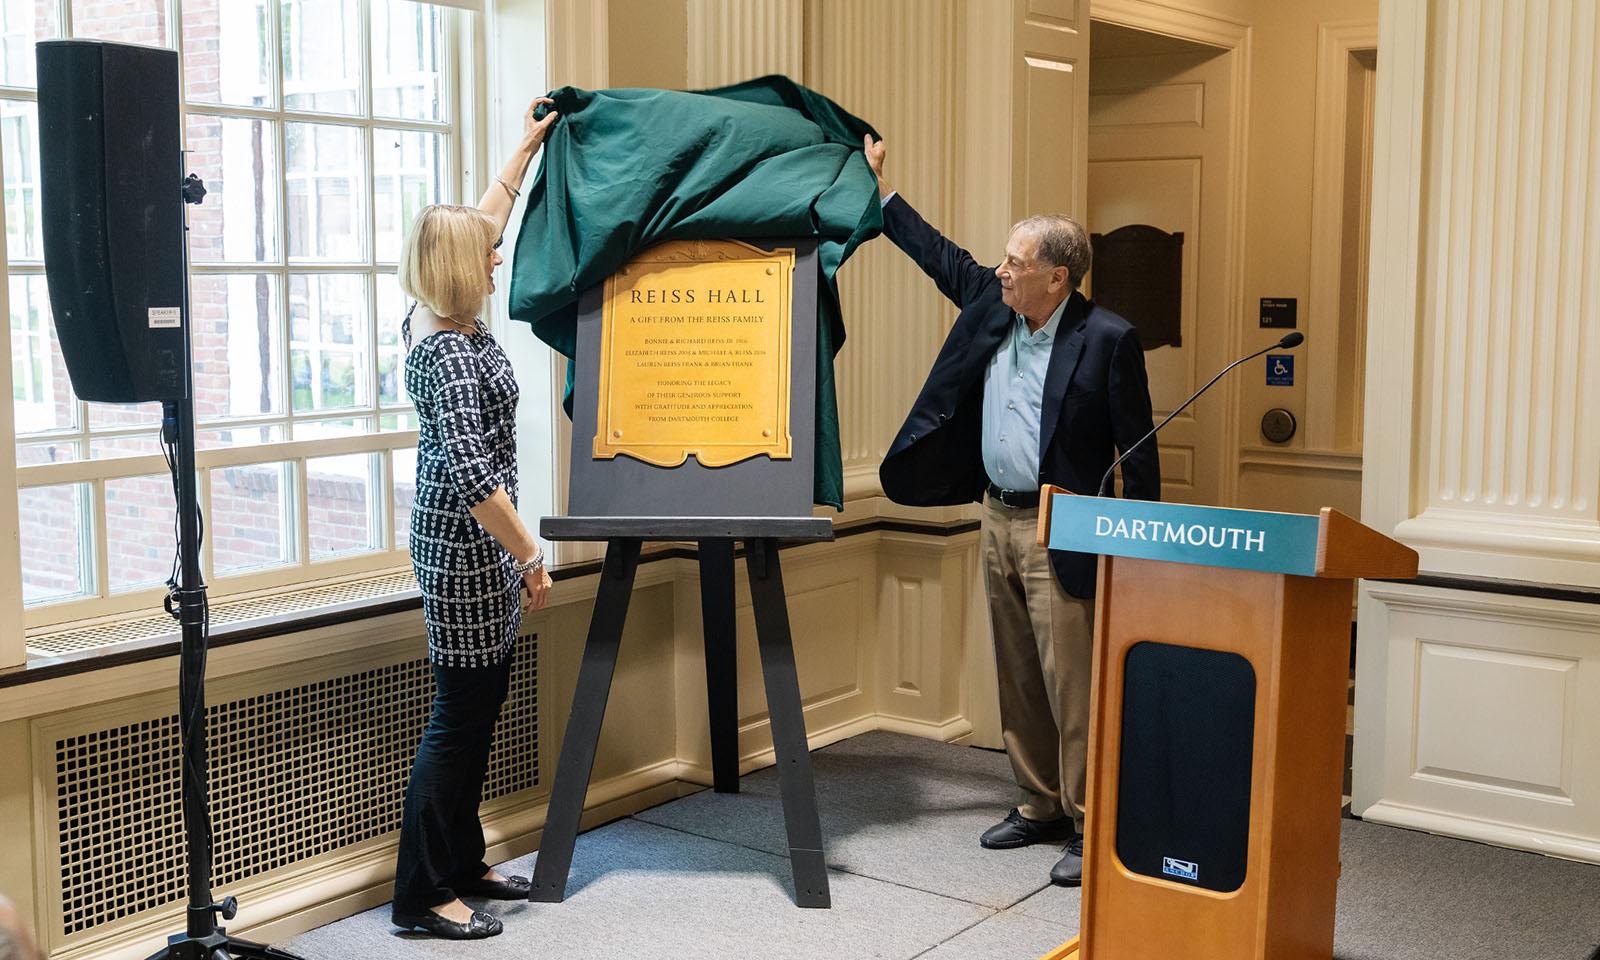 Two people unveil a sign on an easel